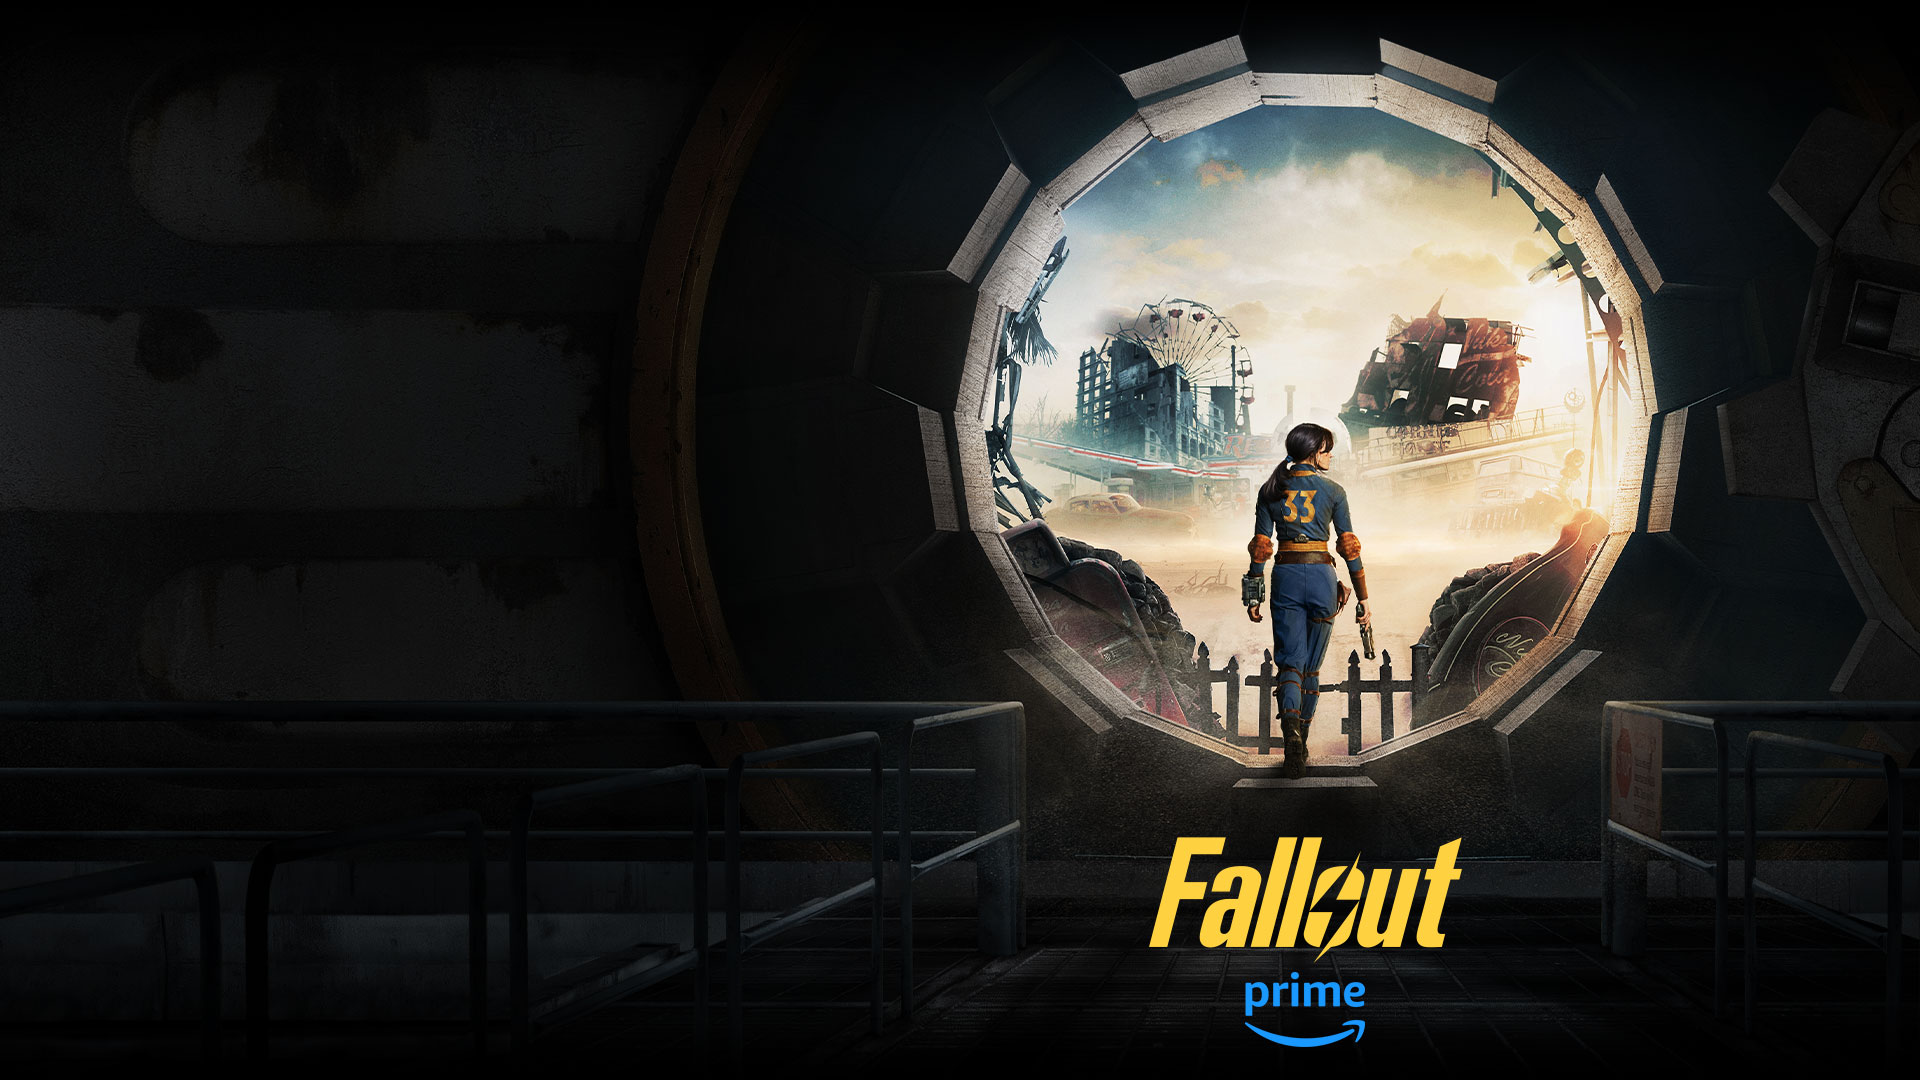 Fallout, Amazon Prime, Lucy exits her vault into the outside world, filled with crumbling buildings.